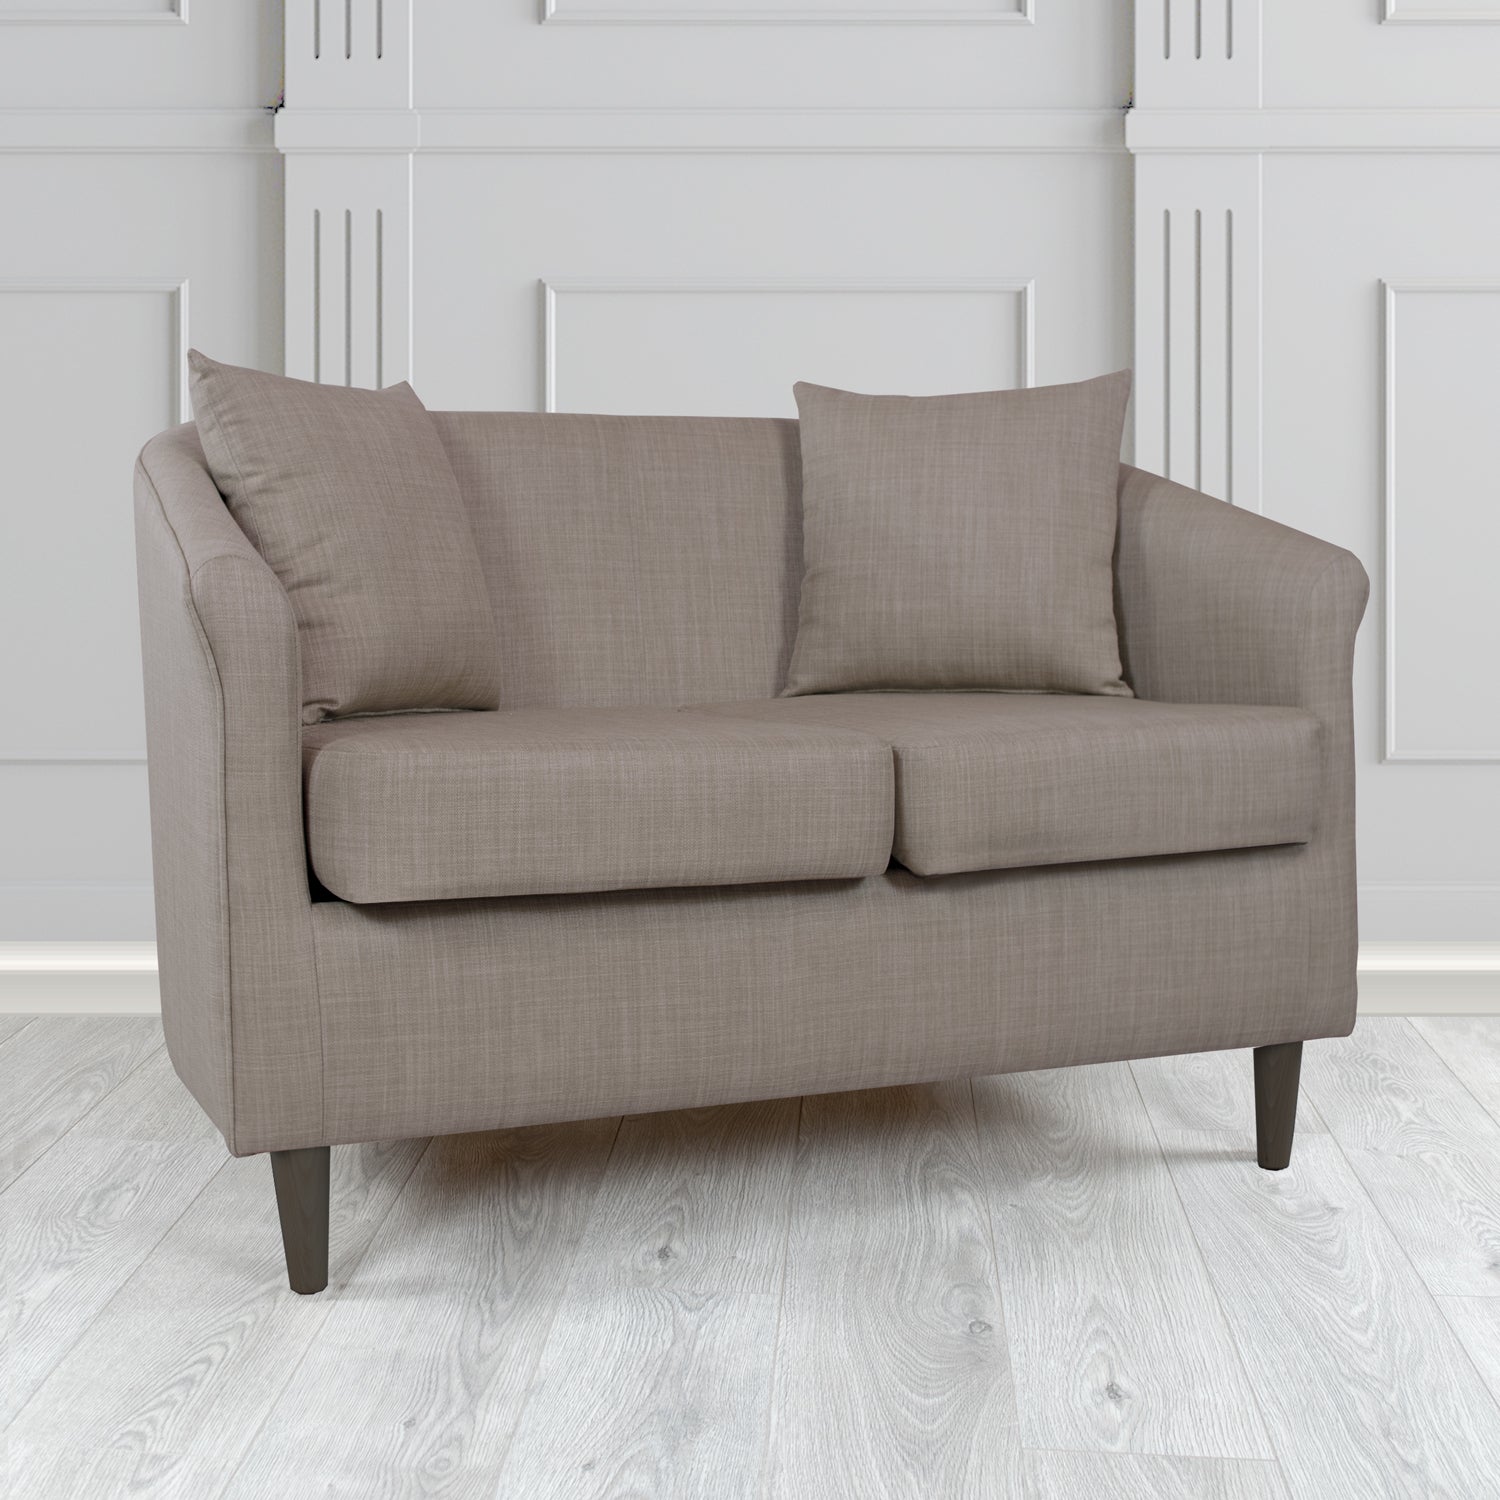 St Tropez Charles Slate Plain Linen Fabric 2 Seater Tub Sofa with Scatter Cushions - The Tub Chair Shop